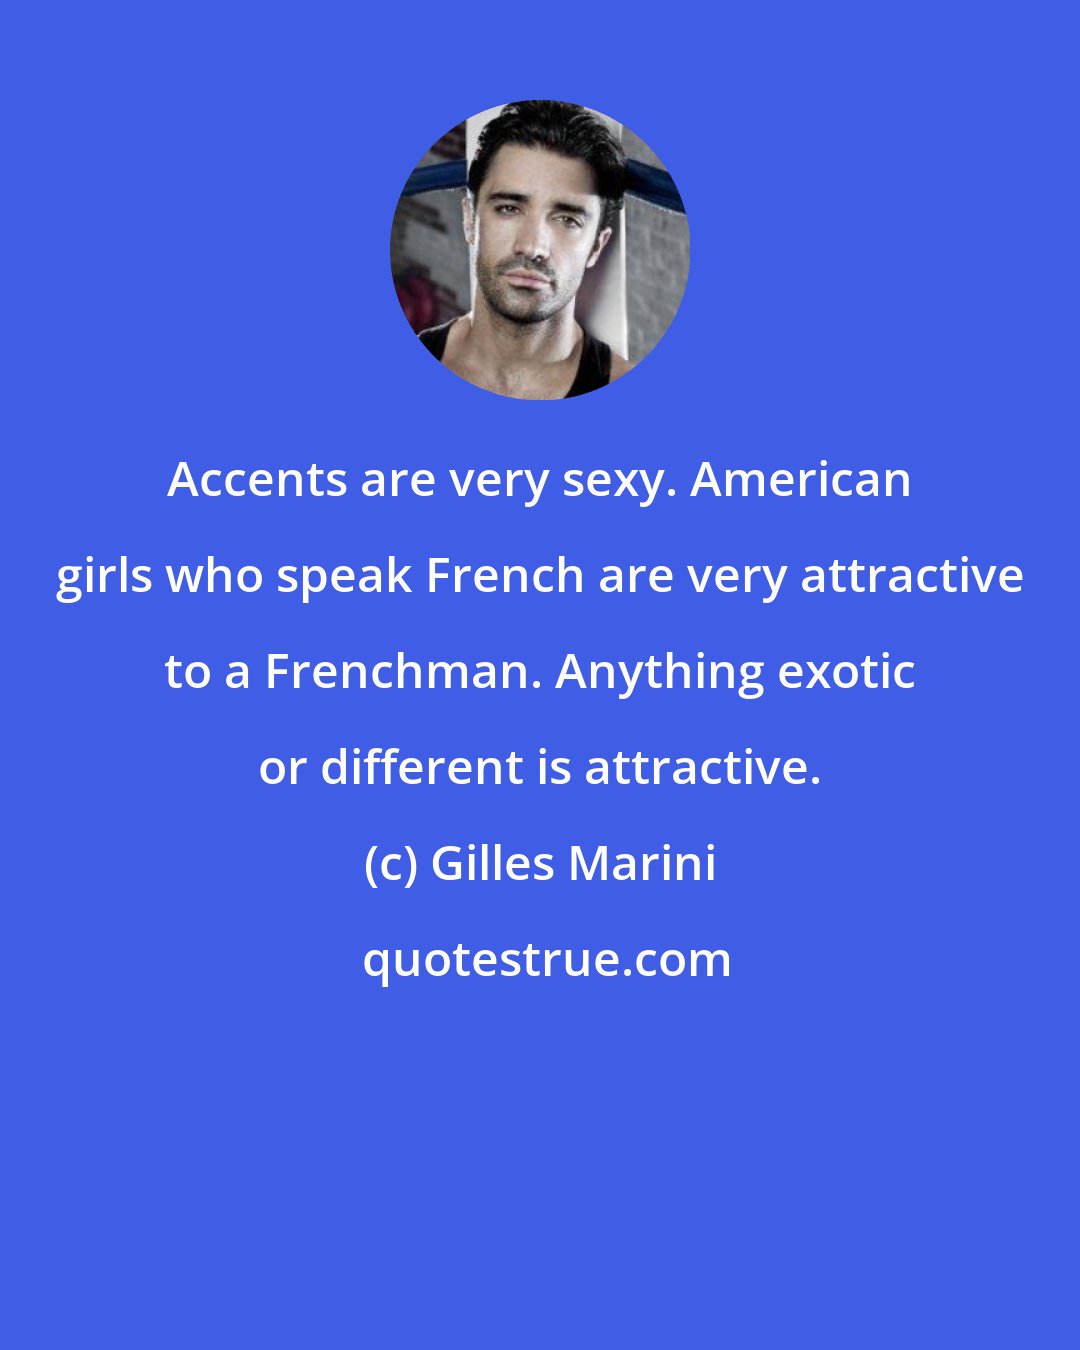 Gilles Marini: Accents are very sexy. American girls who speak French are very attractive to a Frenchman. Anything exotic or different is attractive.